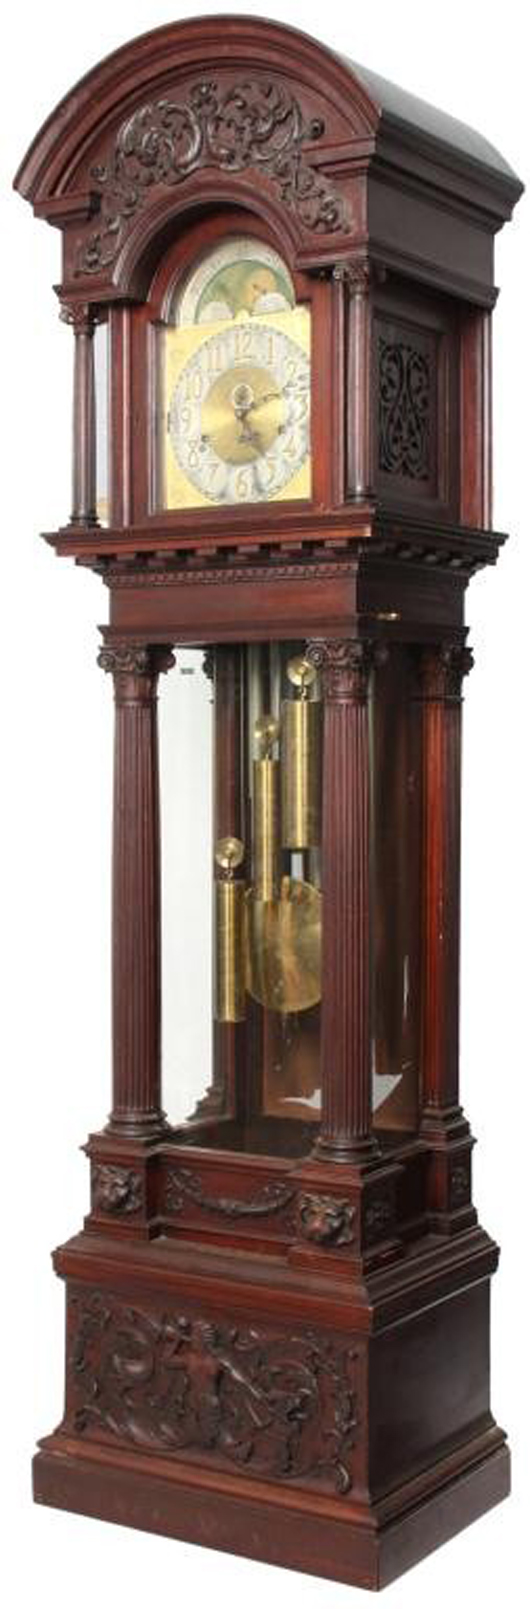 Impressive mahogany figural carved grandfather clock, 103 inches tall (est. $8,000-$12,000). Image courtesy of Fontaine's Auction Gallery.